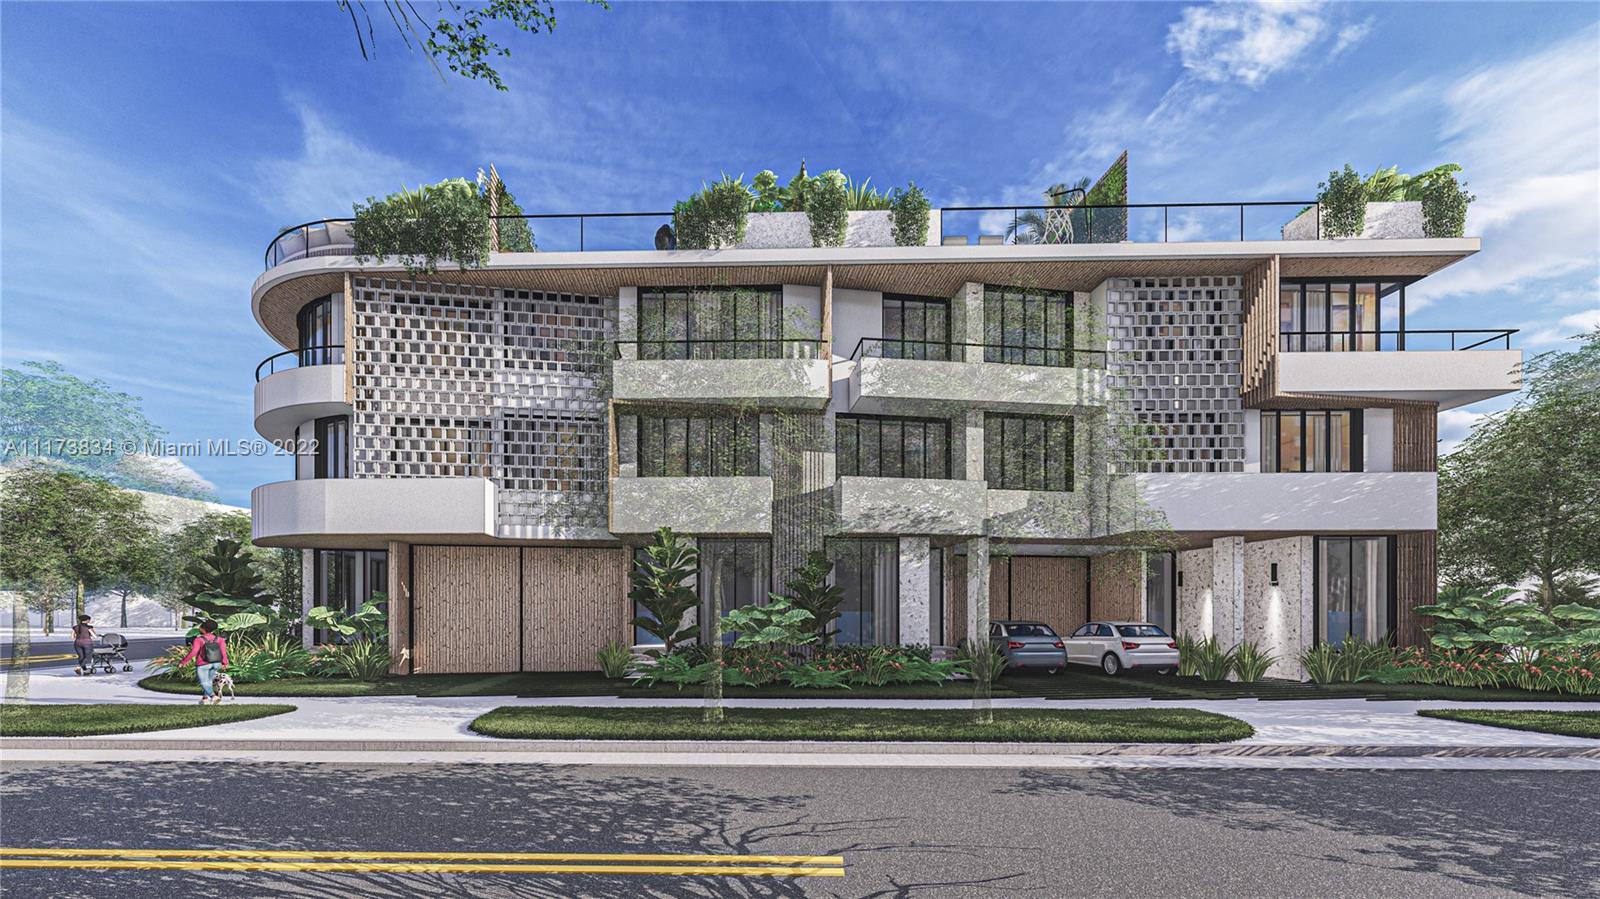 Four uniquely designed High end townhomes in an Upscale Historic neighborhood where homes sell for w